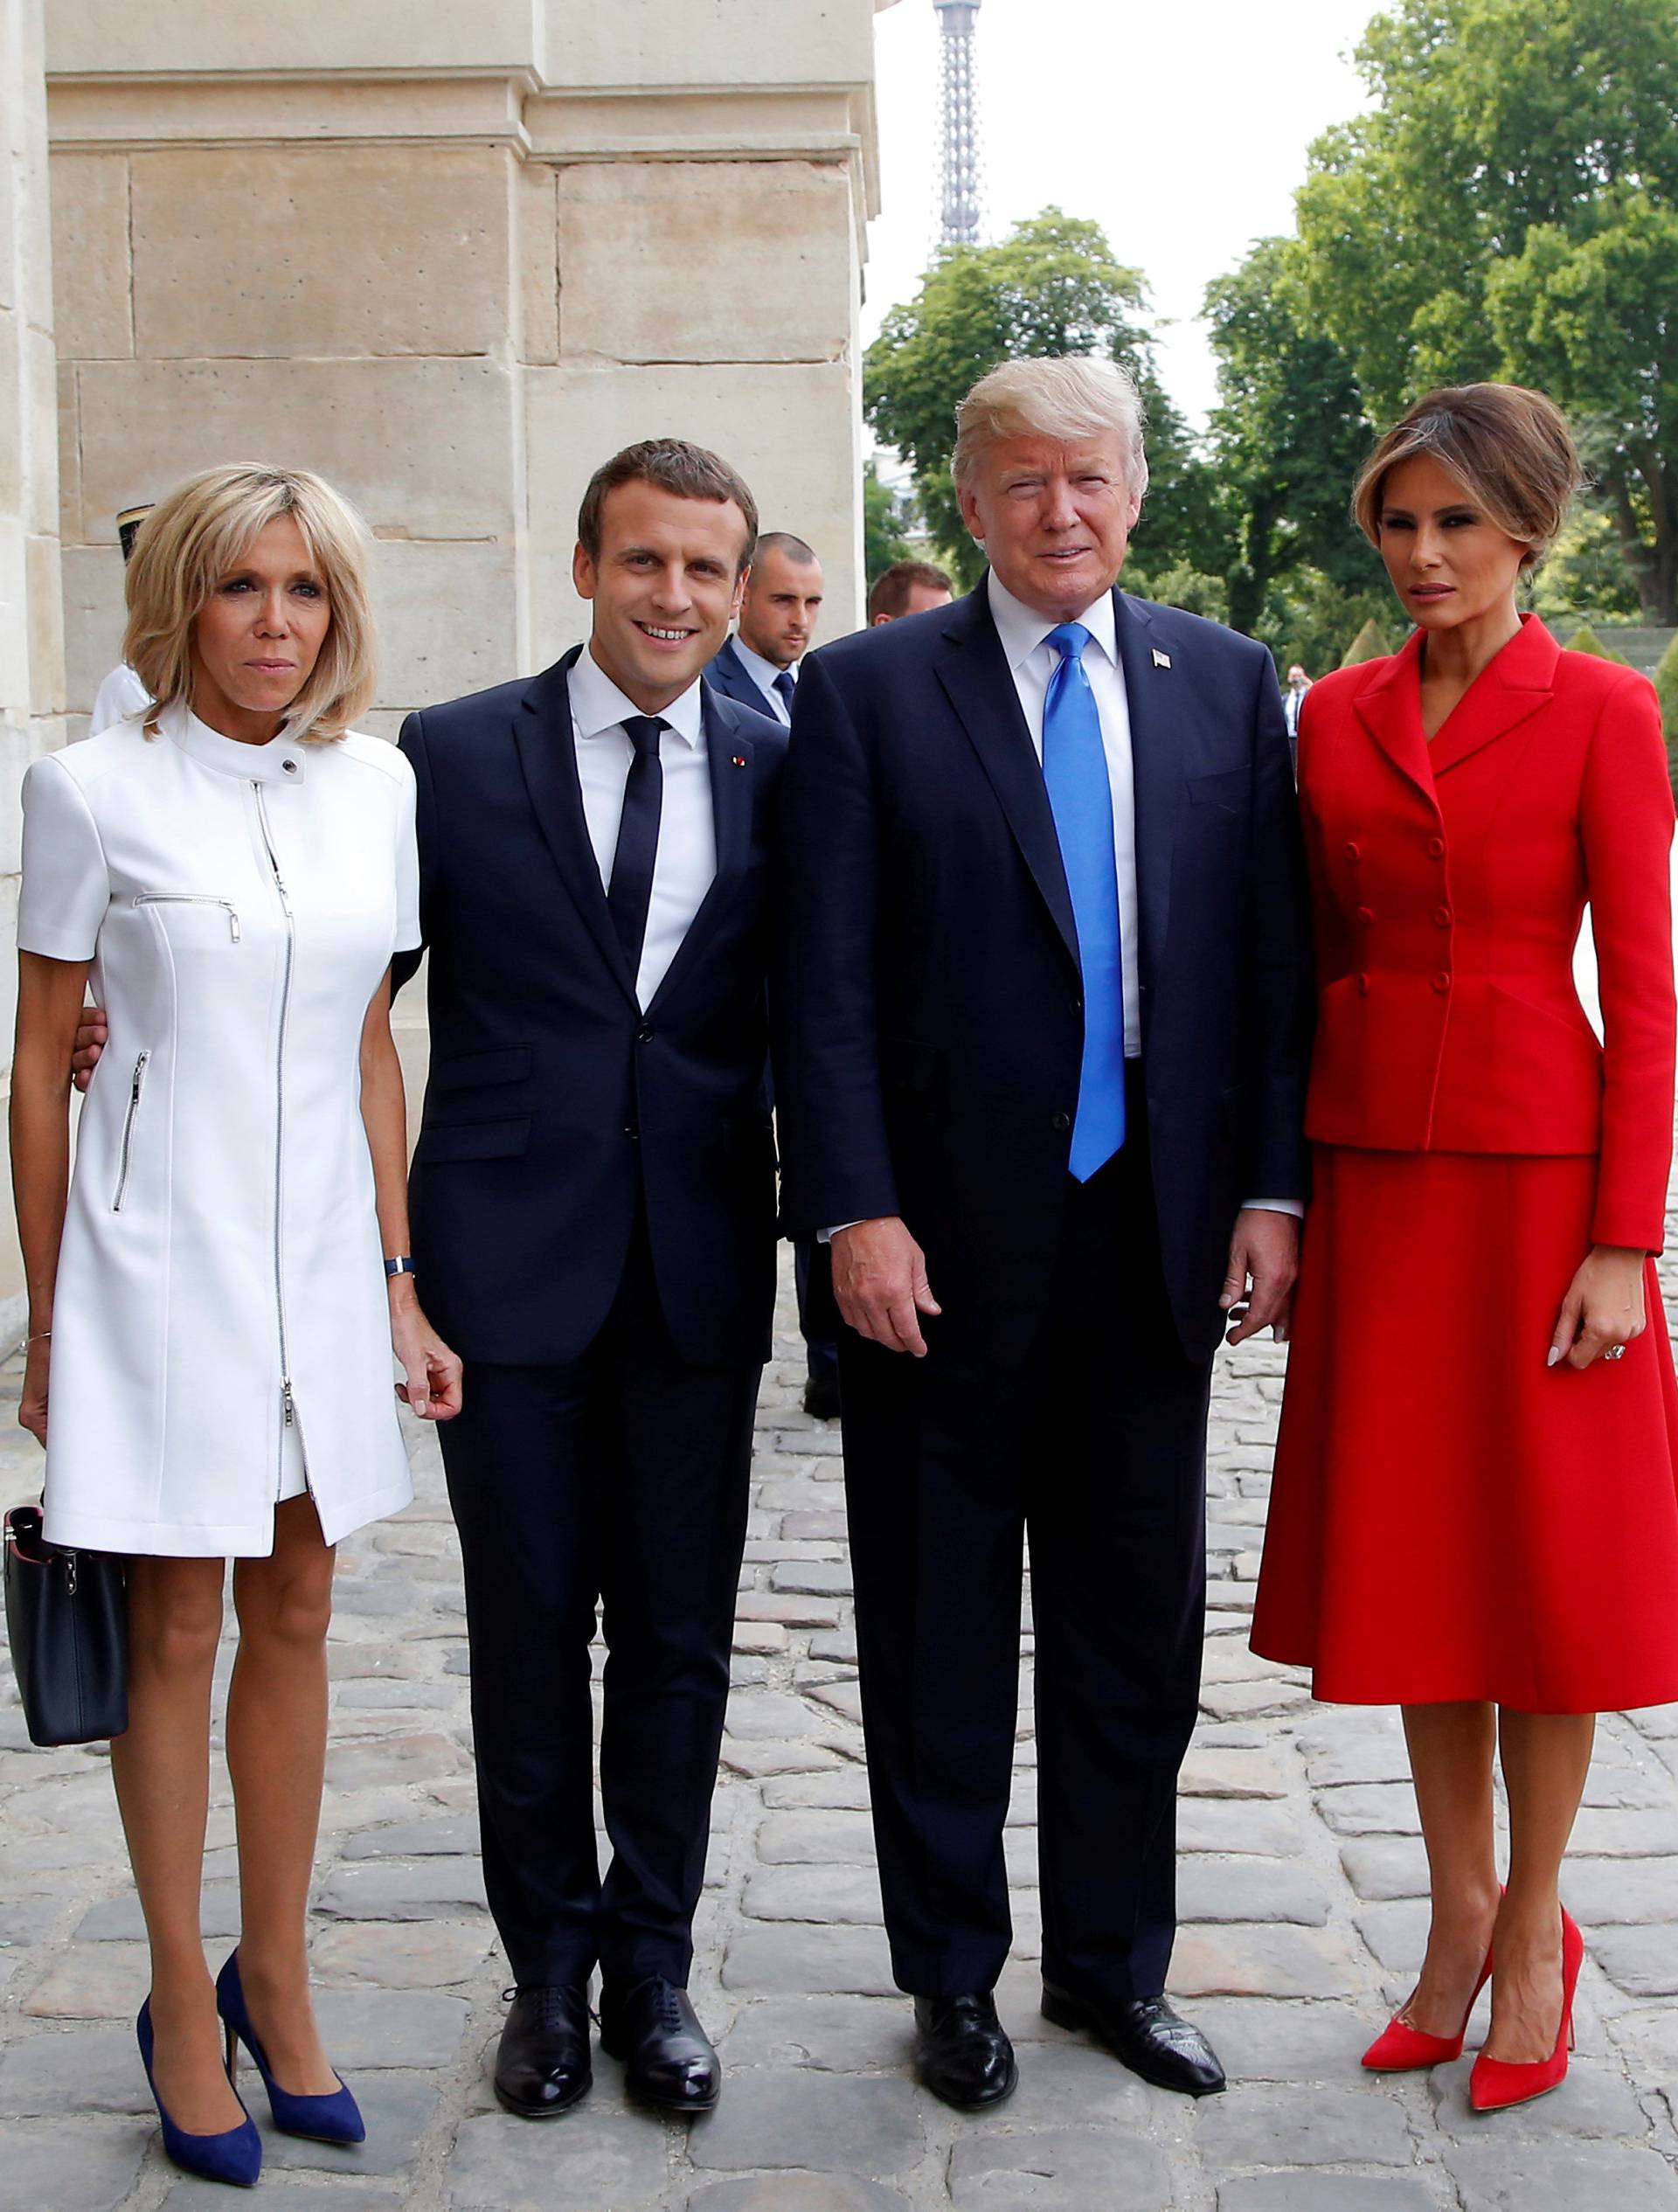 French President Emmanuel Macron and his wife Brigitte pose with US President Donald Trump and First Lady Melania Trump at Les Invalides museum in Paris